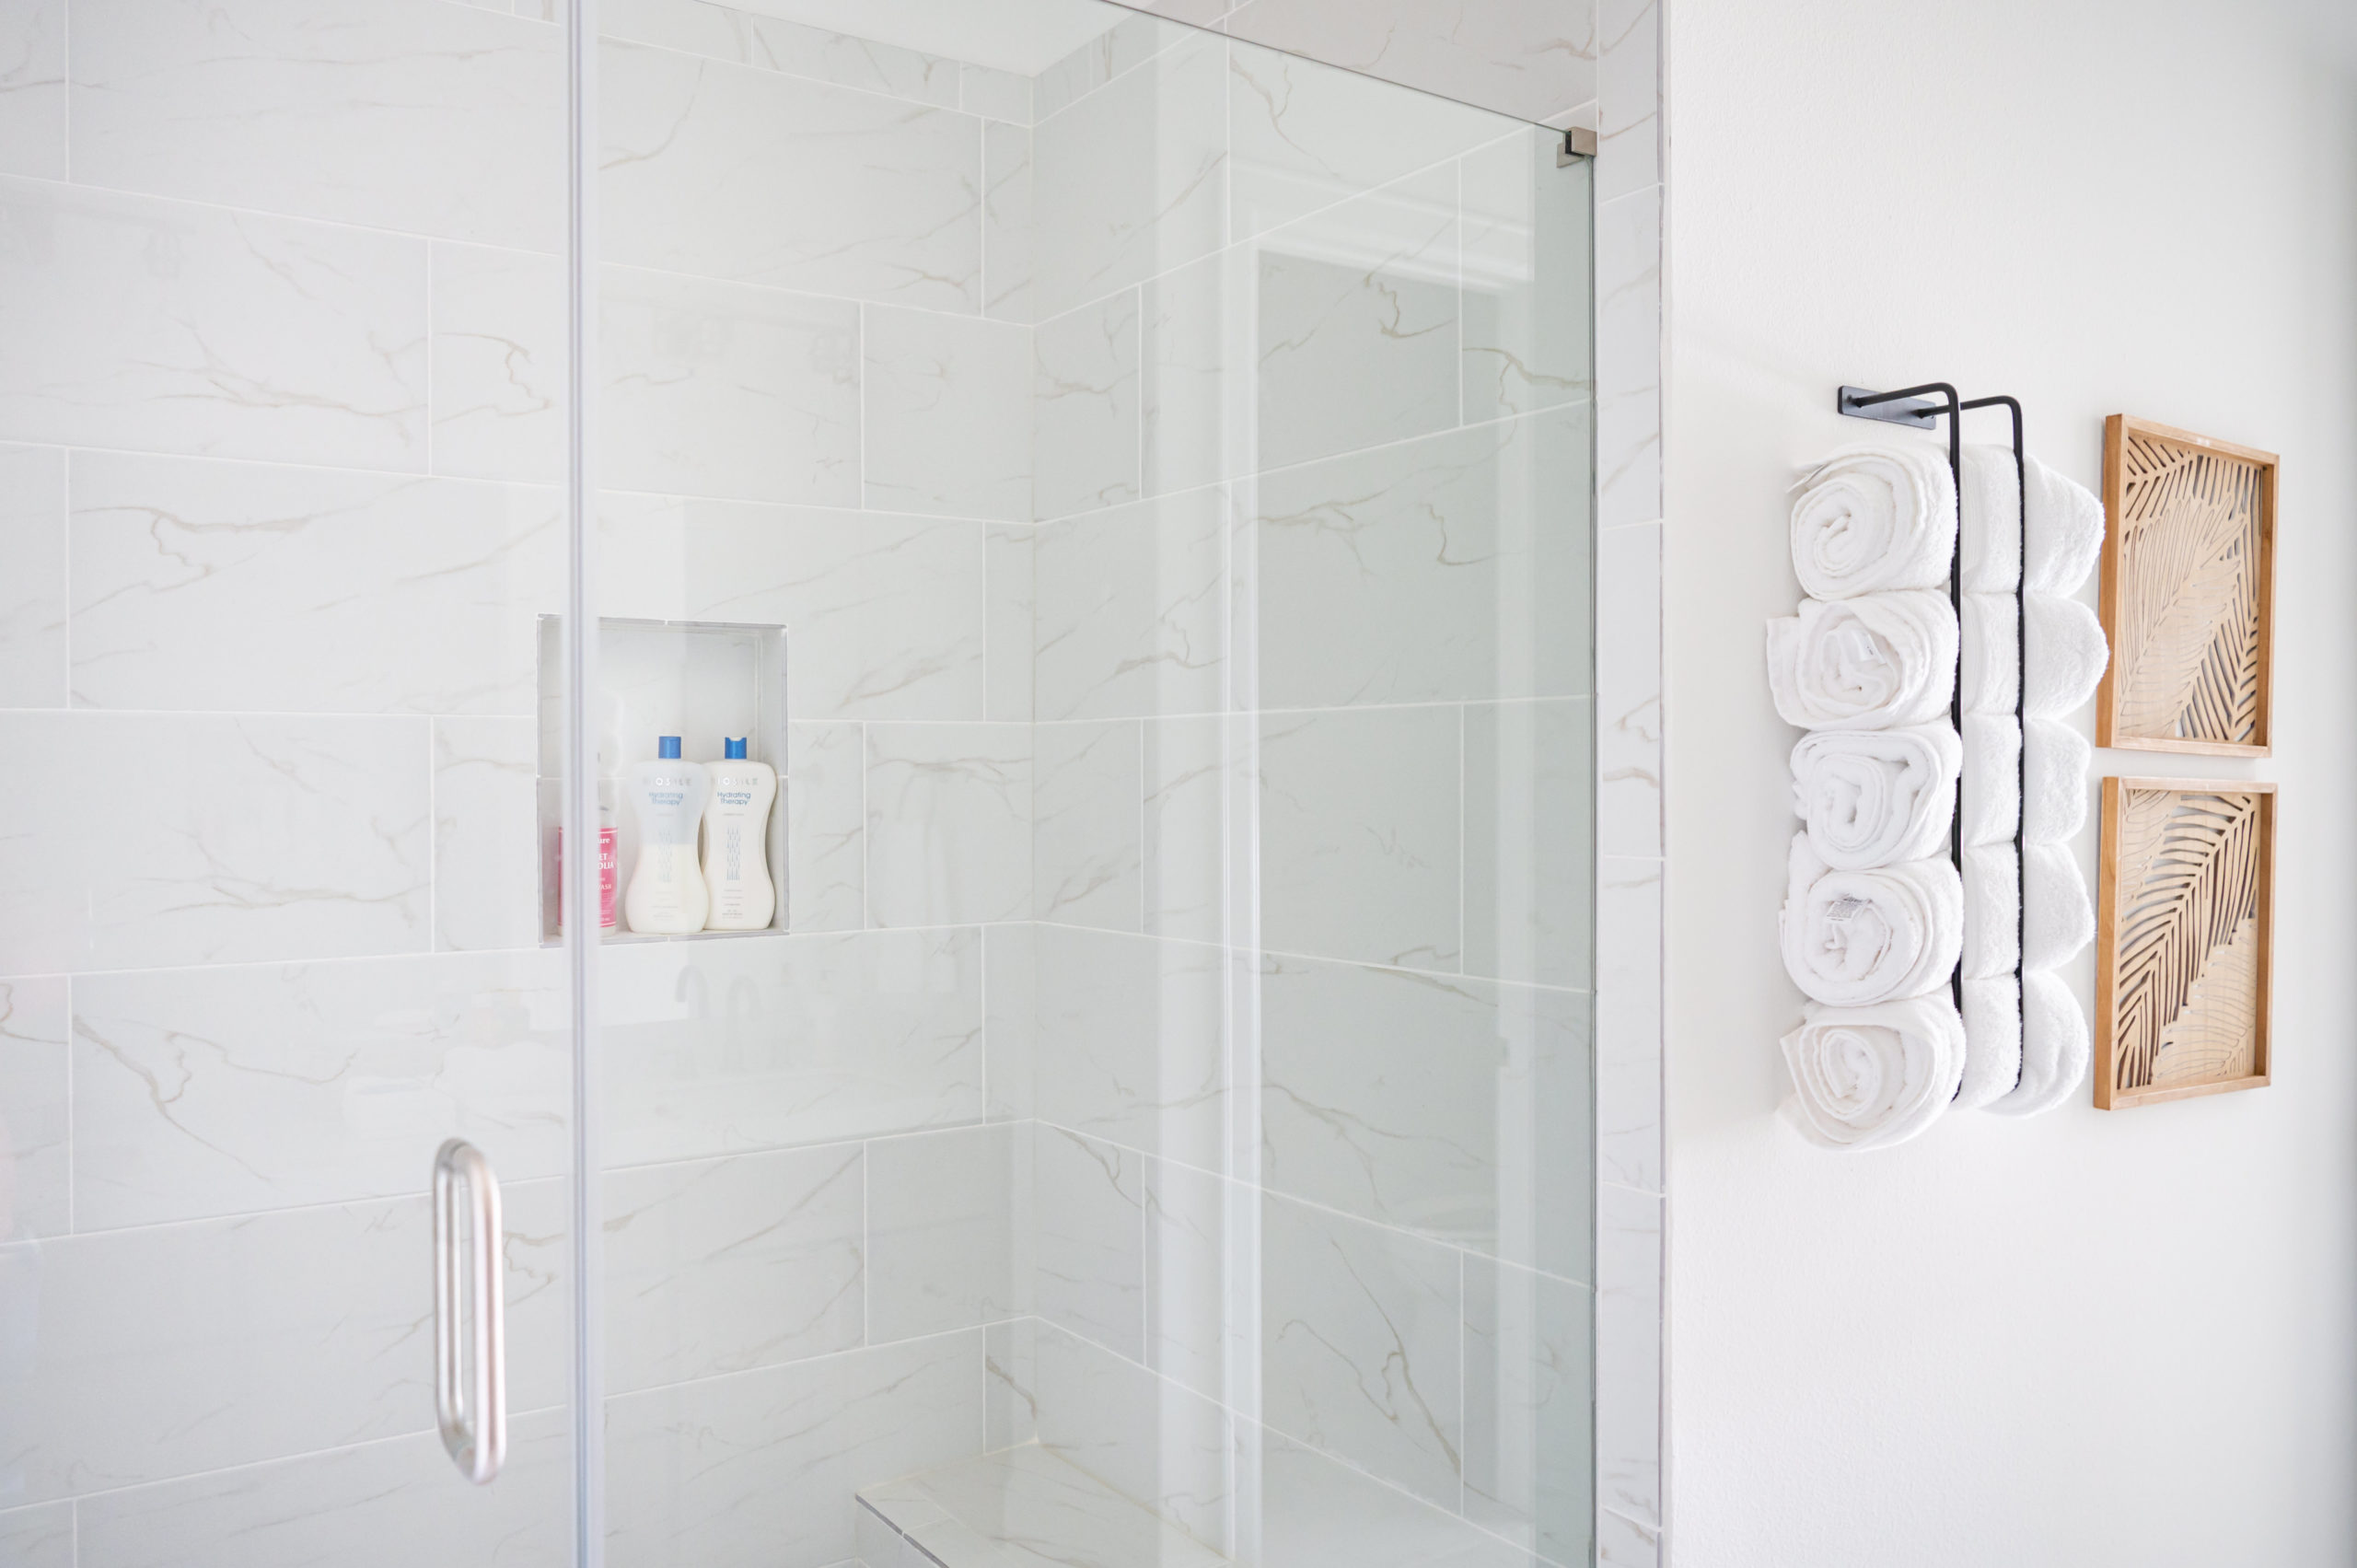 Vacation Rental Photography photos of Master bathroom shower with marble walls and glass door